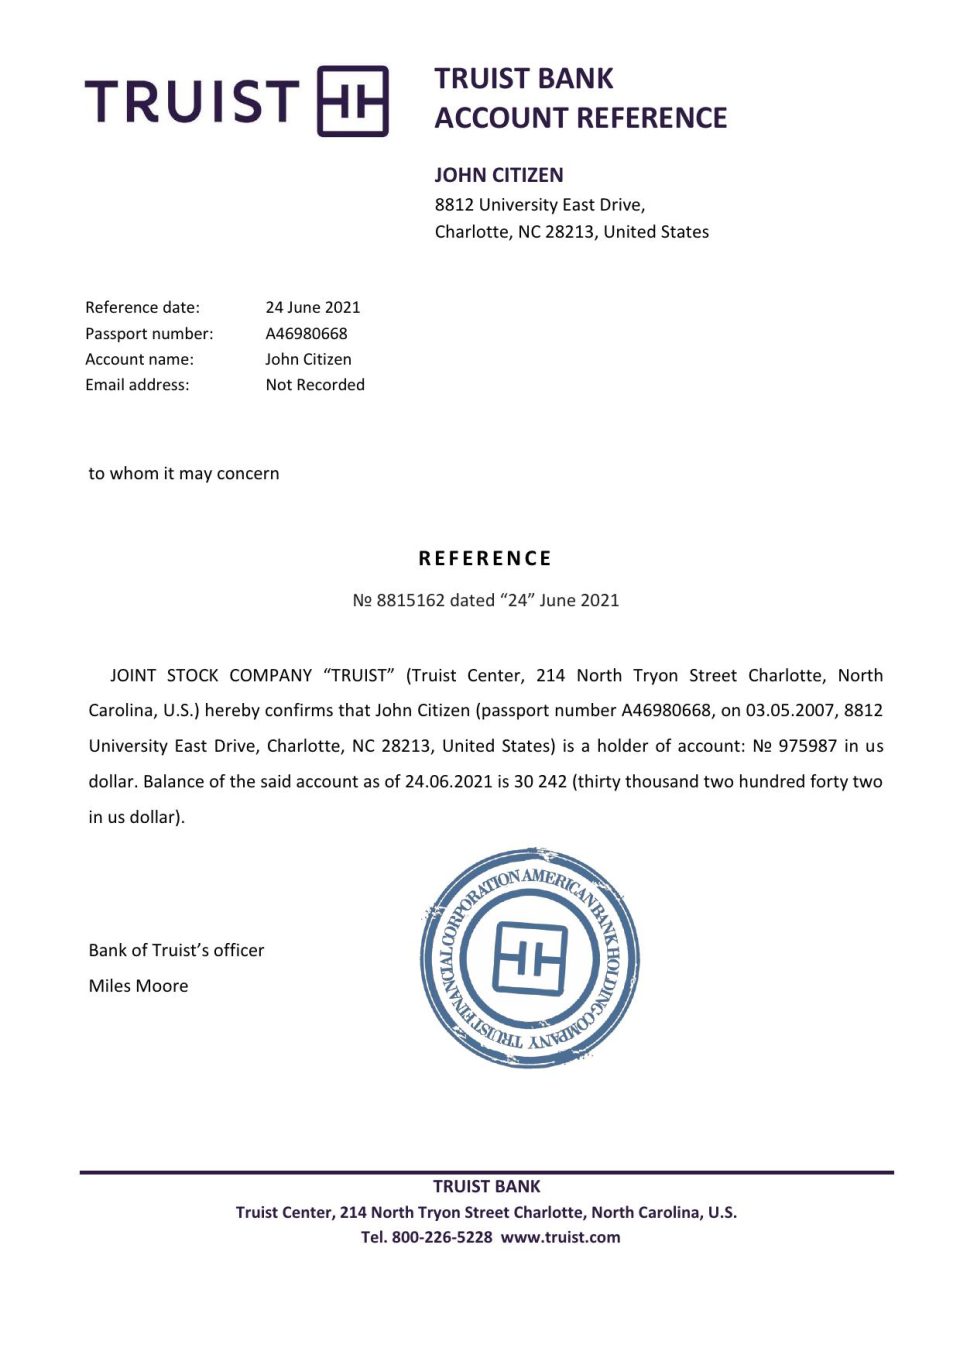 Download USA Truist Bank Reference Letter Templates | Editable Word